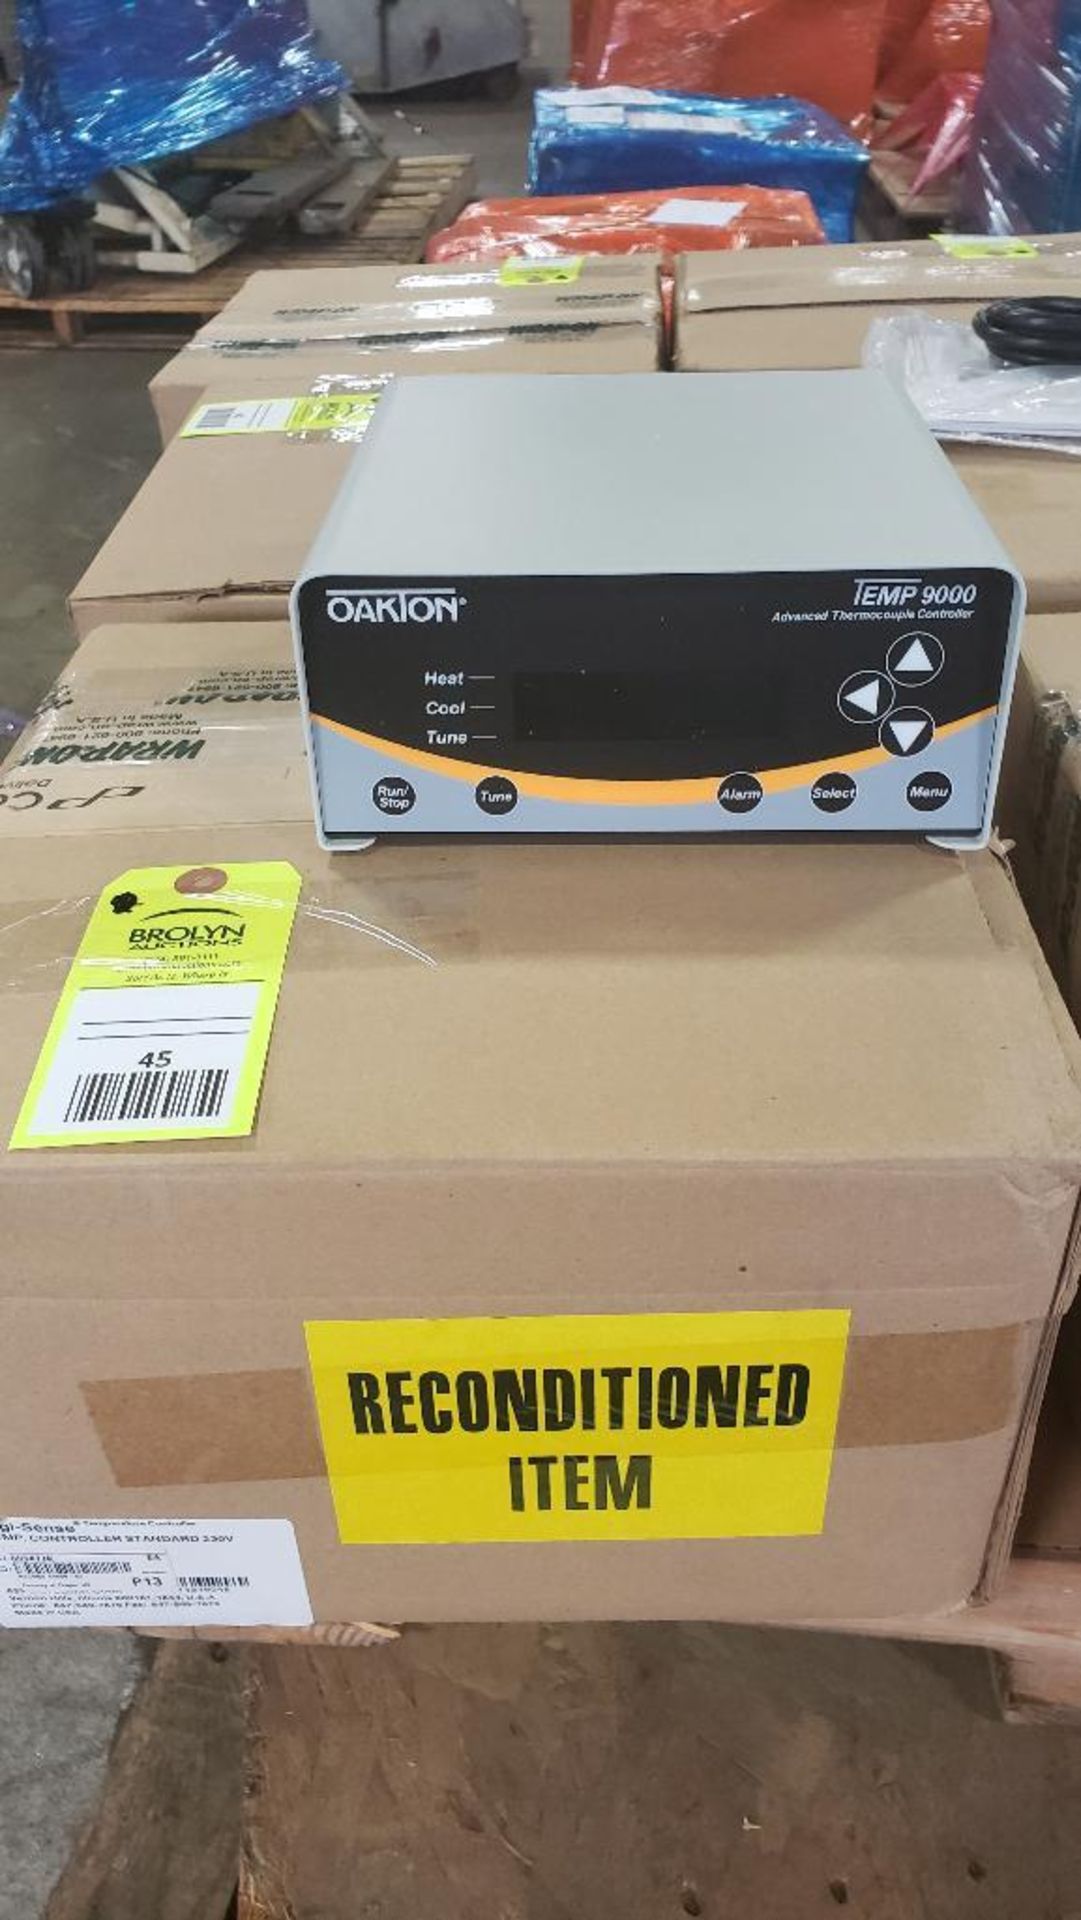 Oakton Temp 9000 model 89800-02 advanced thermocouple controller. Marked as reconditioned.